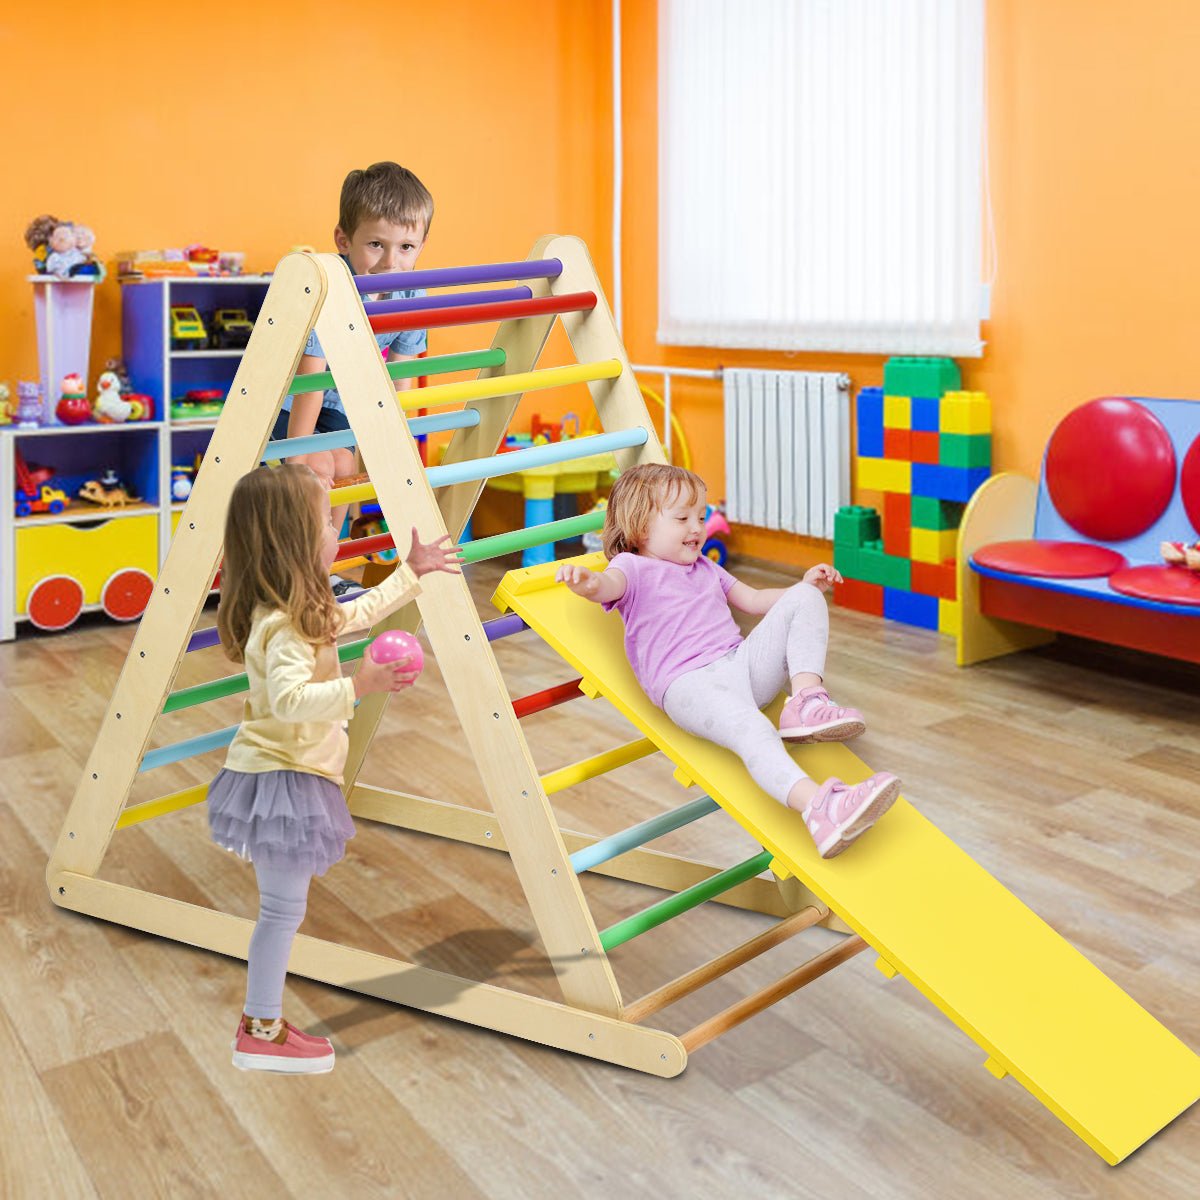 Multicolour Wooden Climbing Triangle Ladder - Secure Triangular Structure for Play